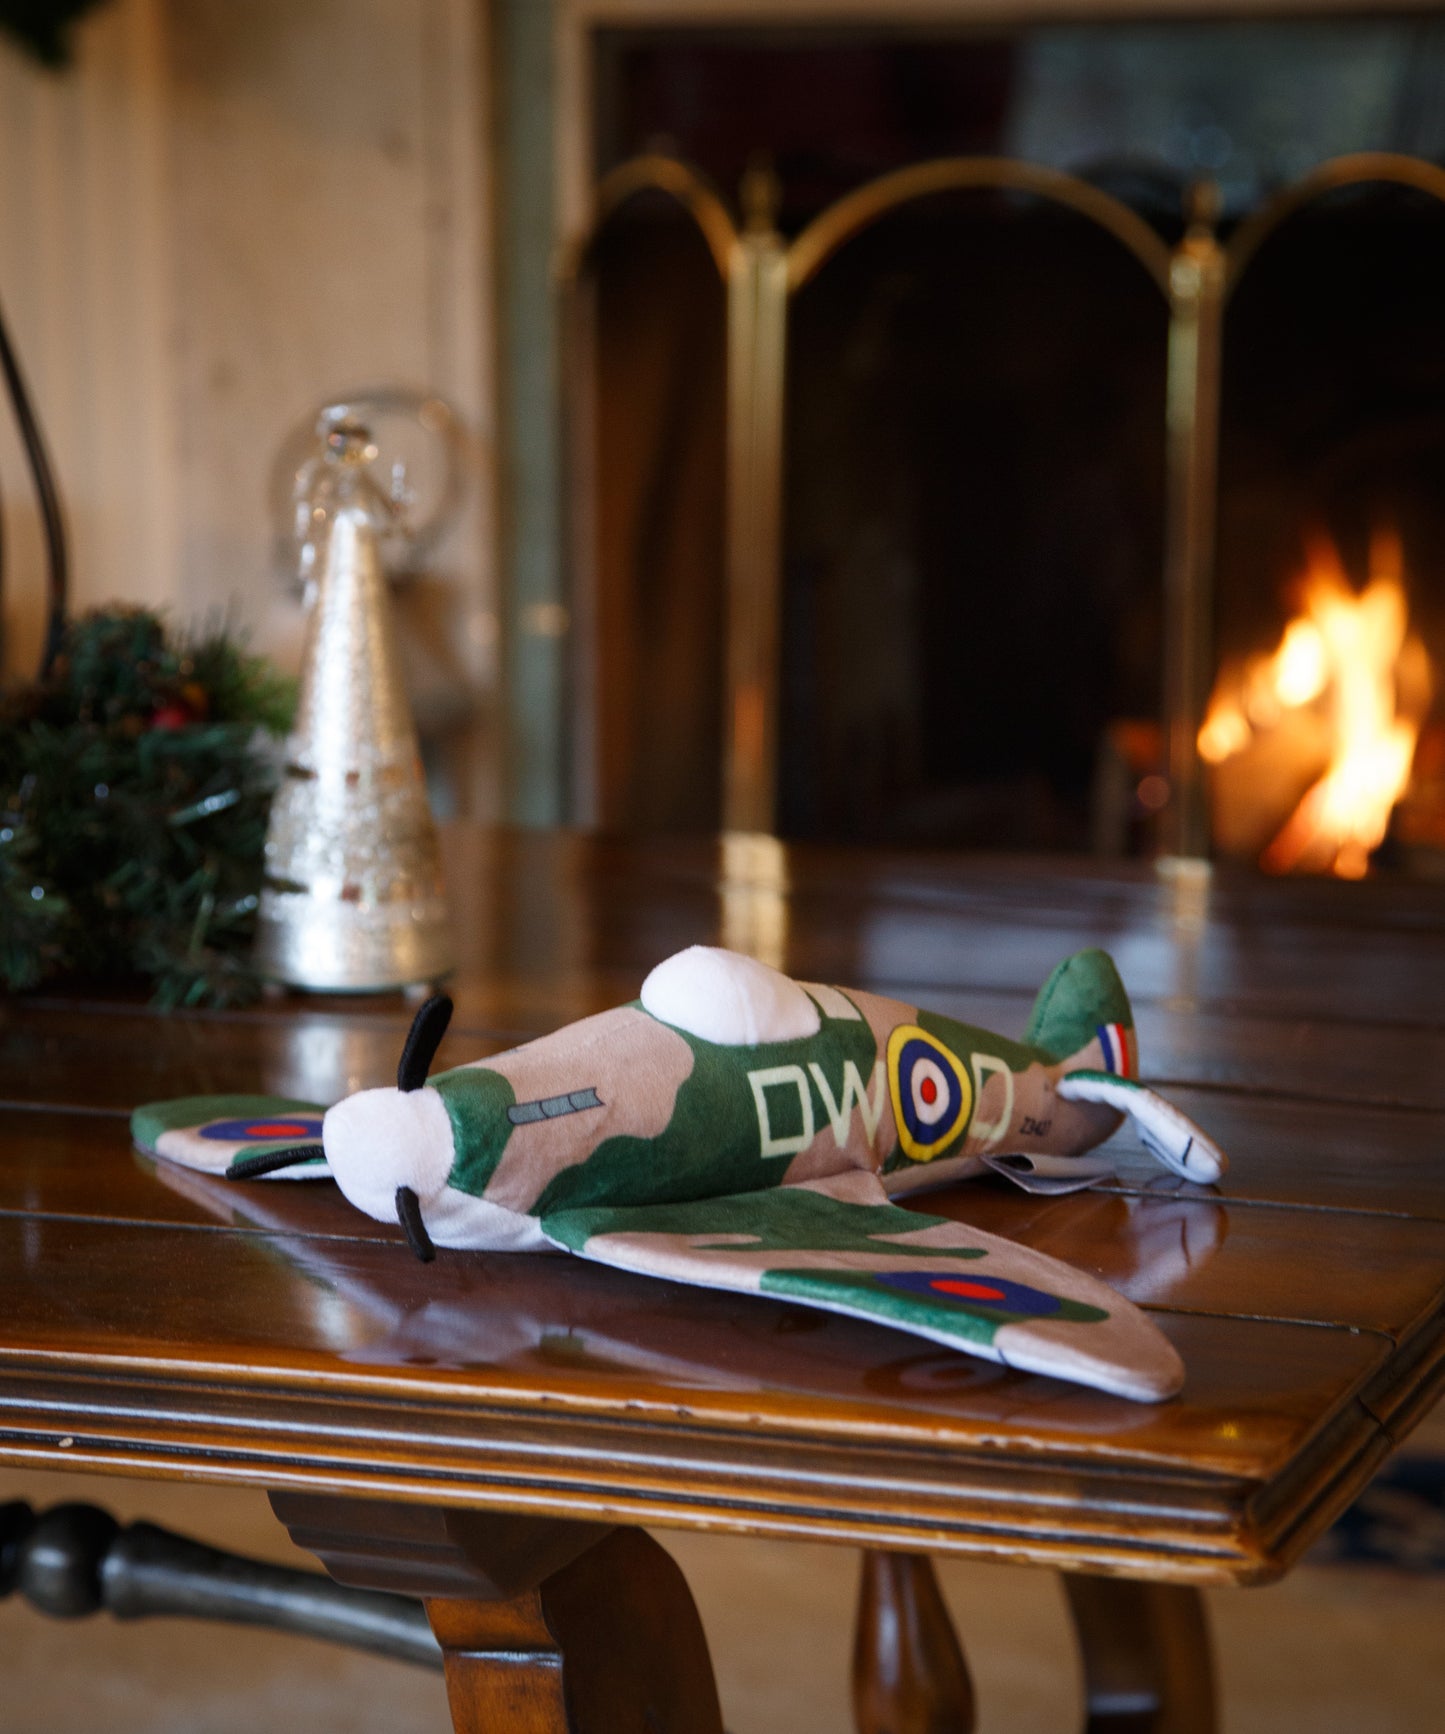 Goodwood Spitfire Cuddly Toy